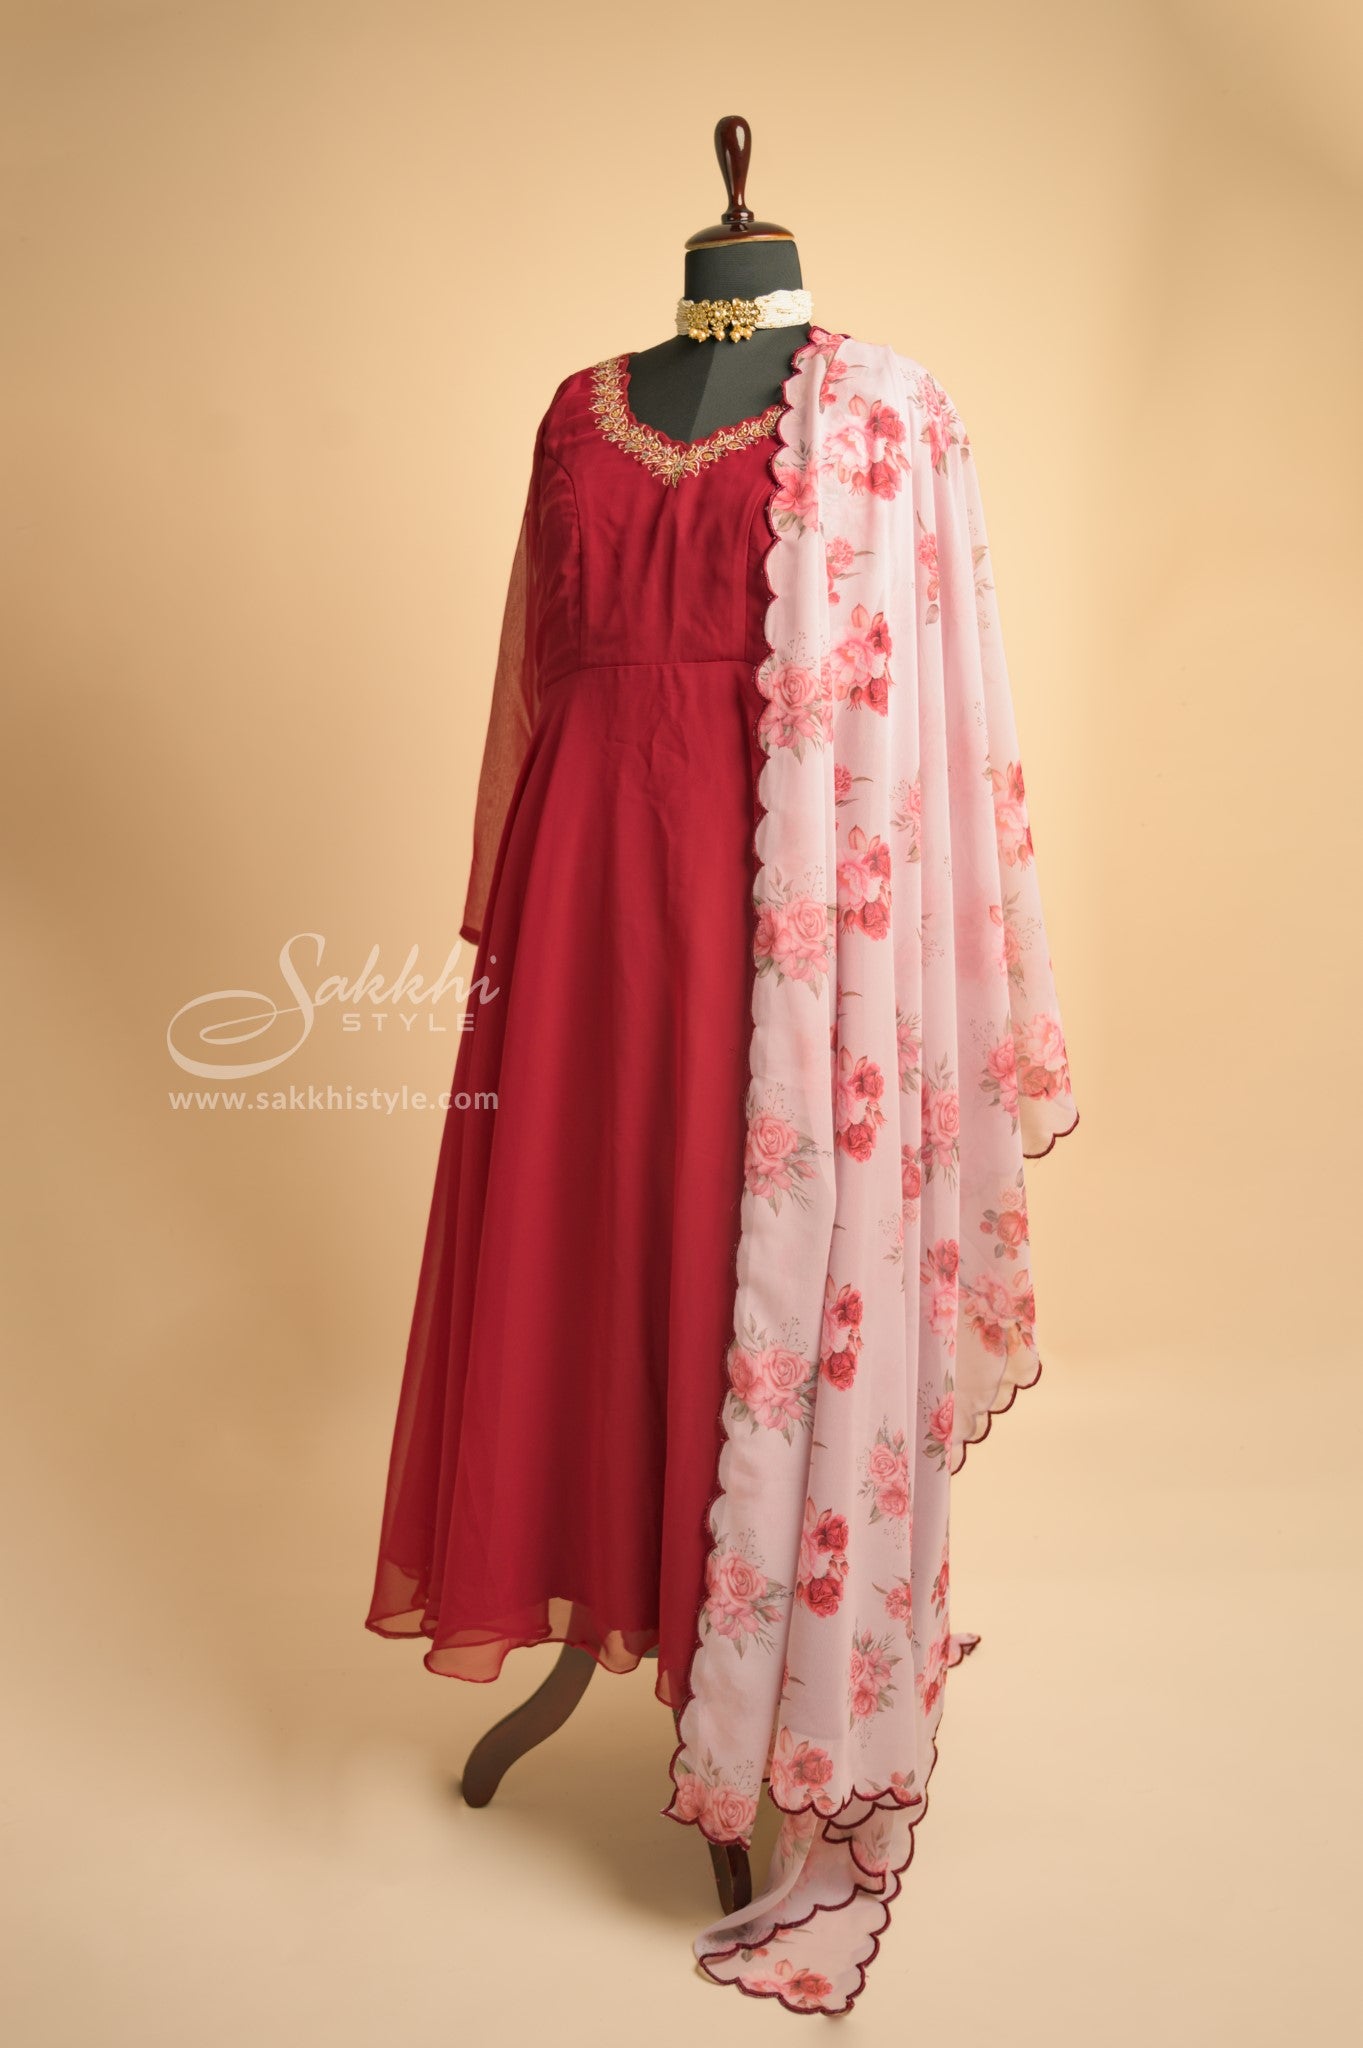 MAROON CHIFFON FLOOR LENGTH GOWN WITH FLORAL DUPPATTA - Sakkhi Style